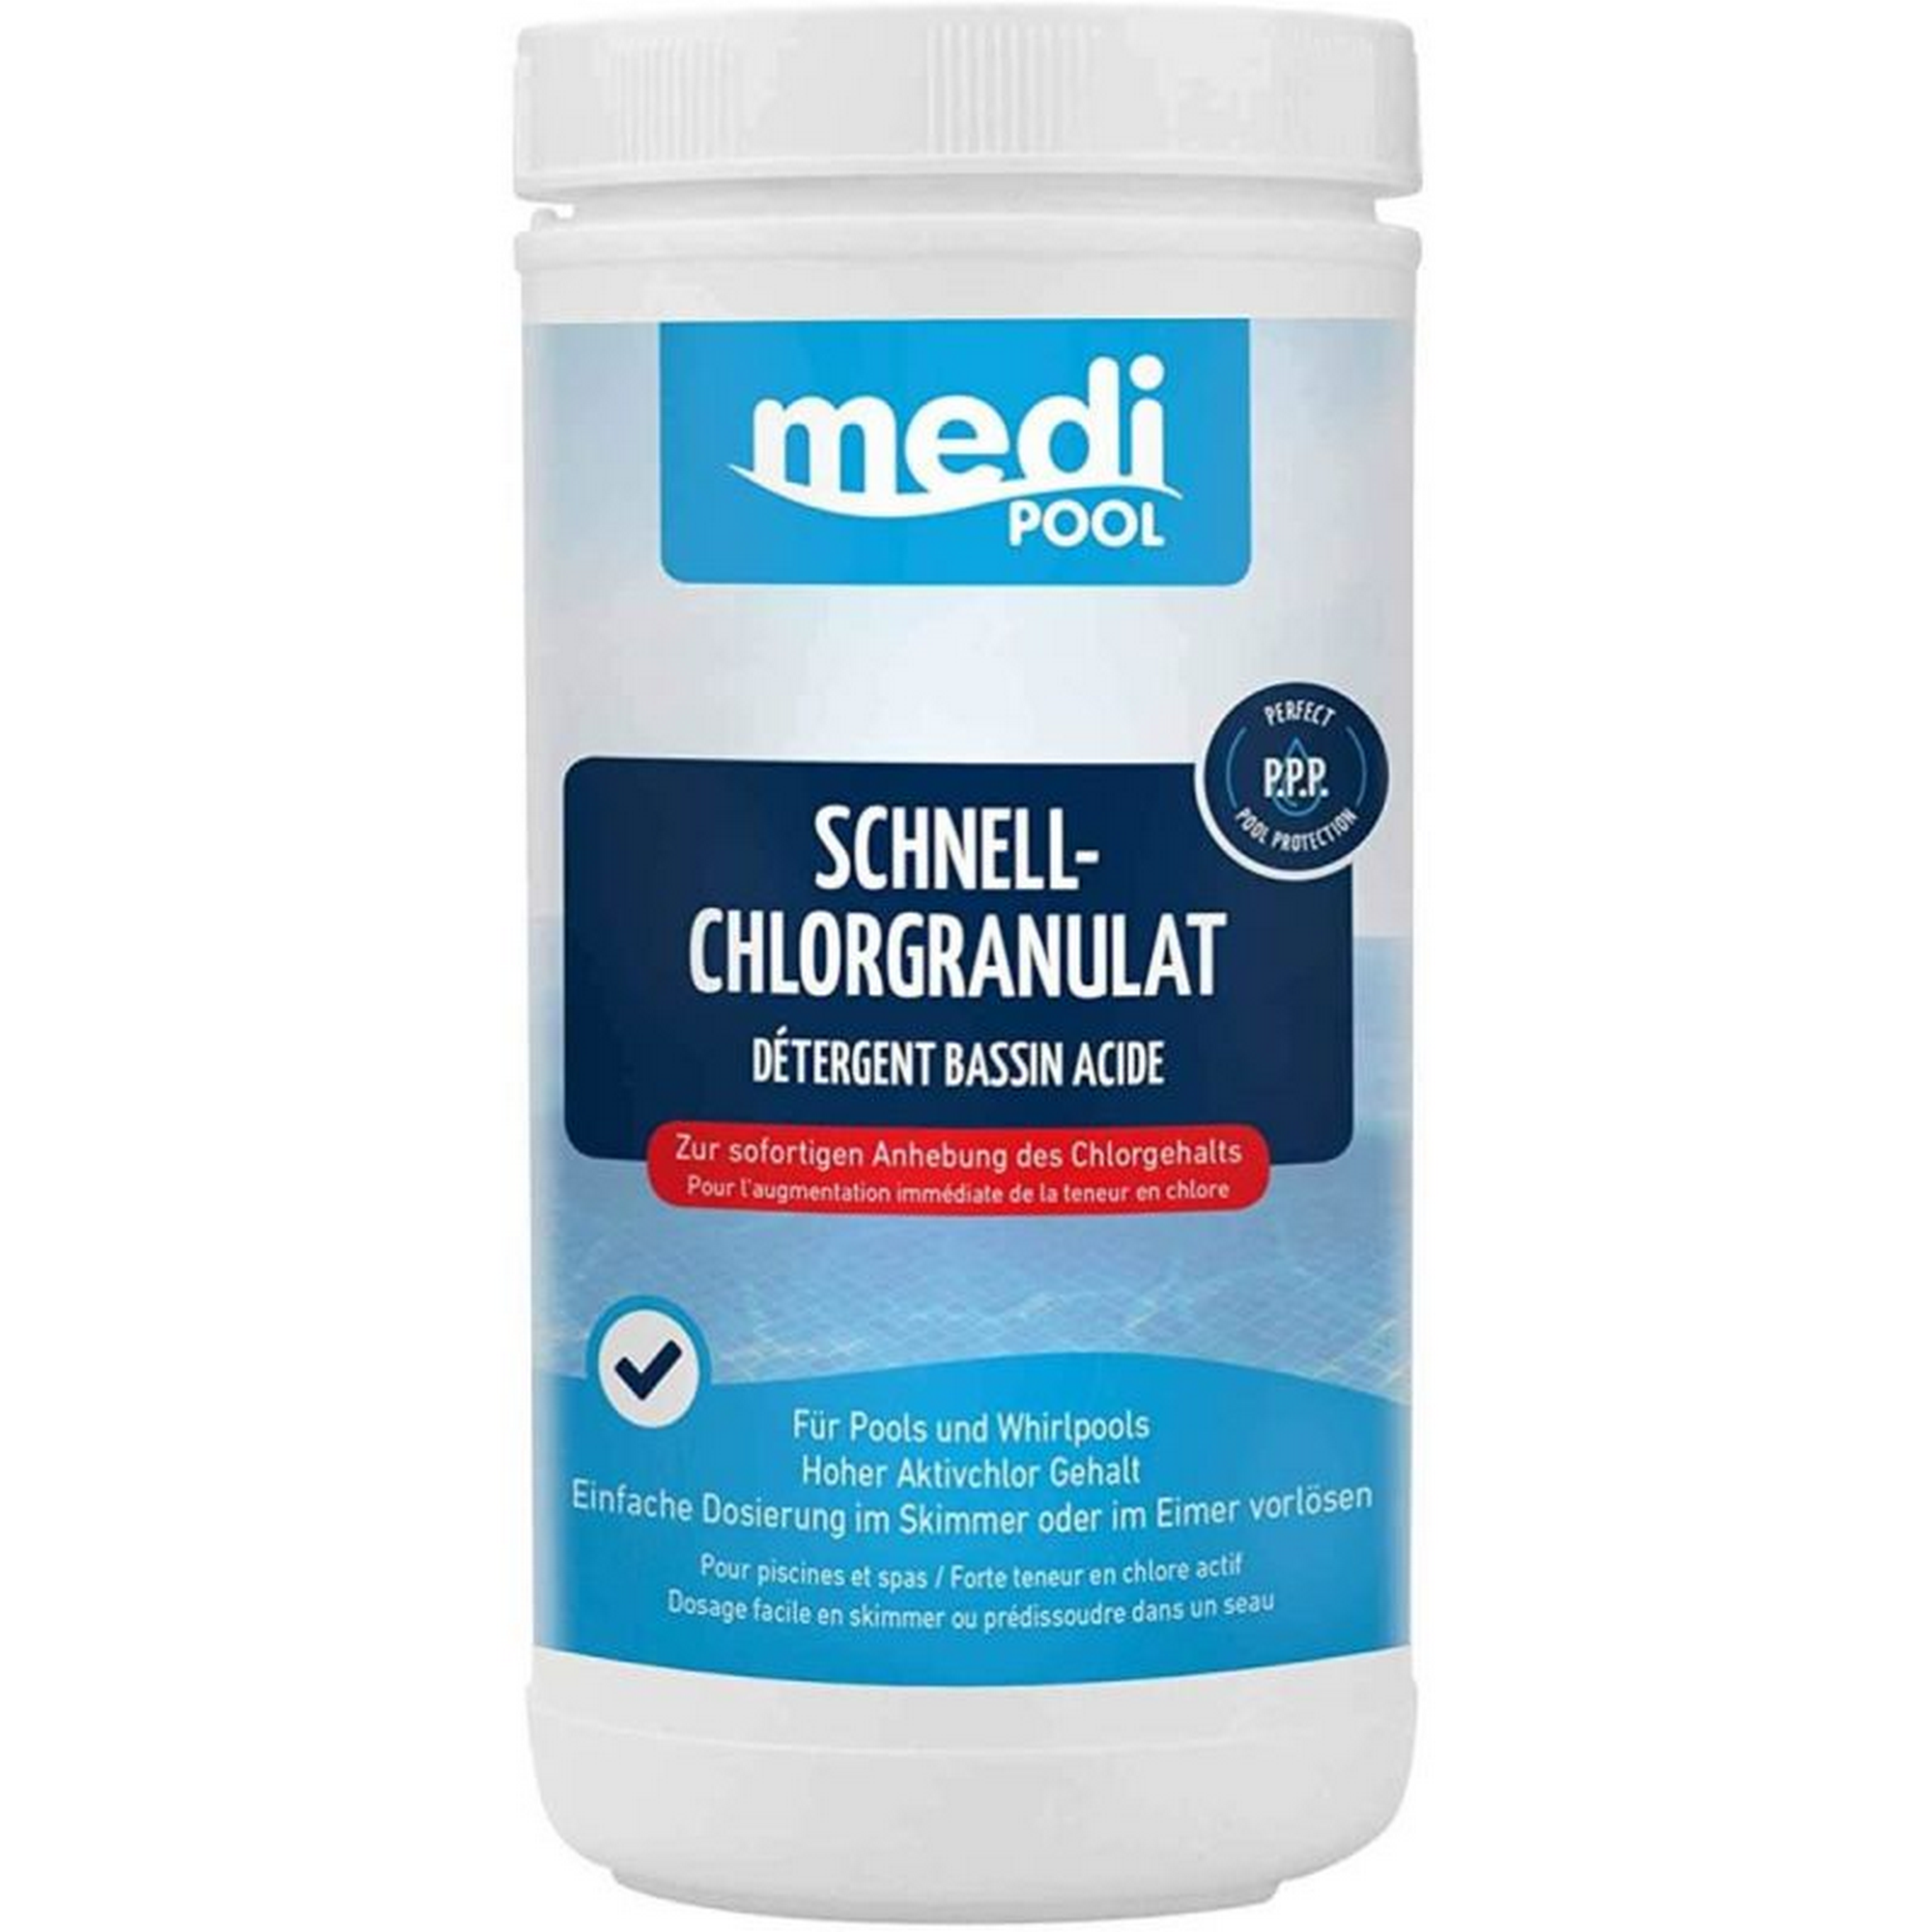 Schnell-Chlorgranulat 1 kg + product picture